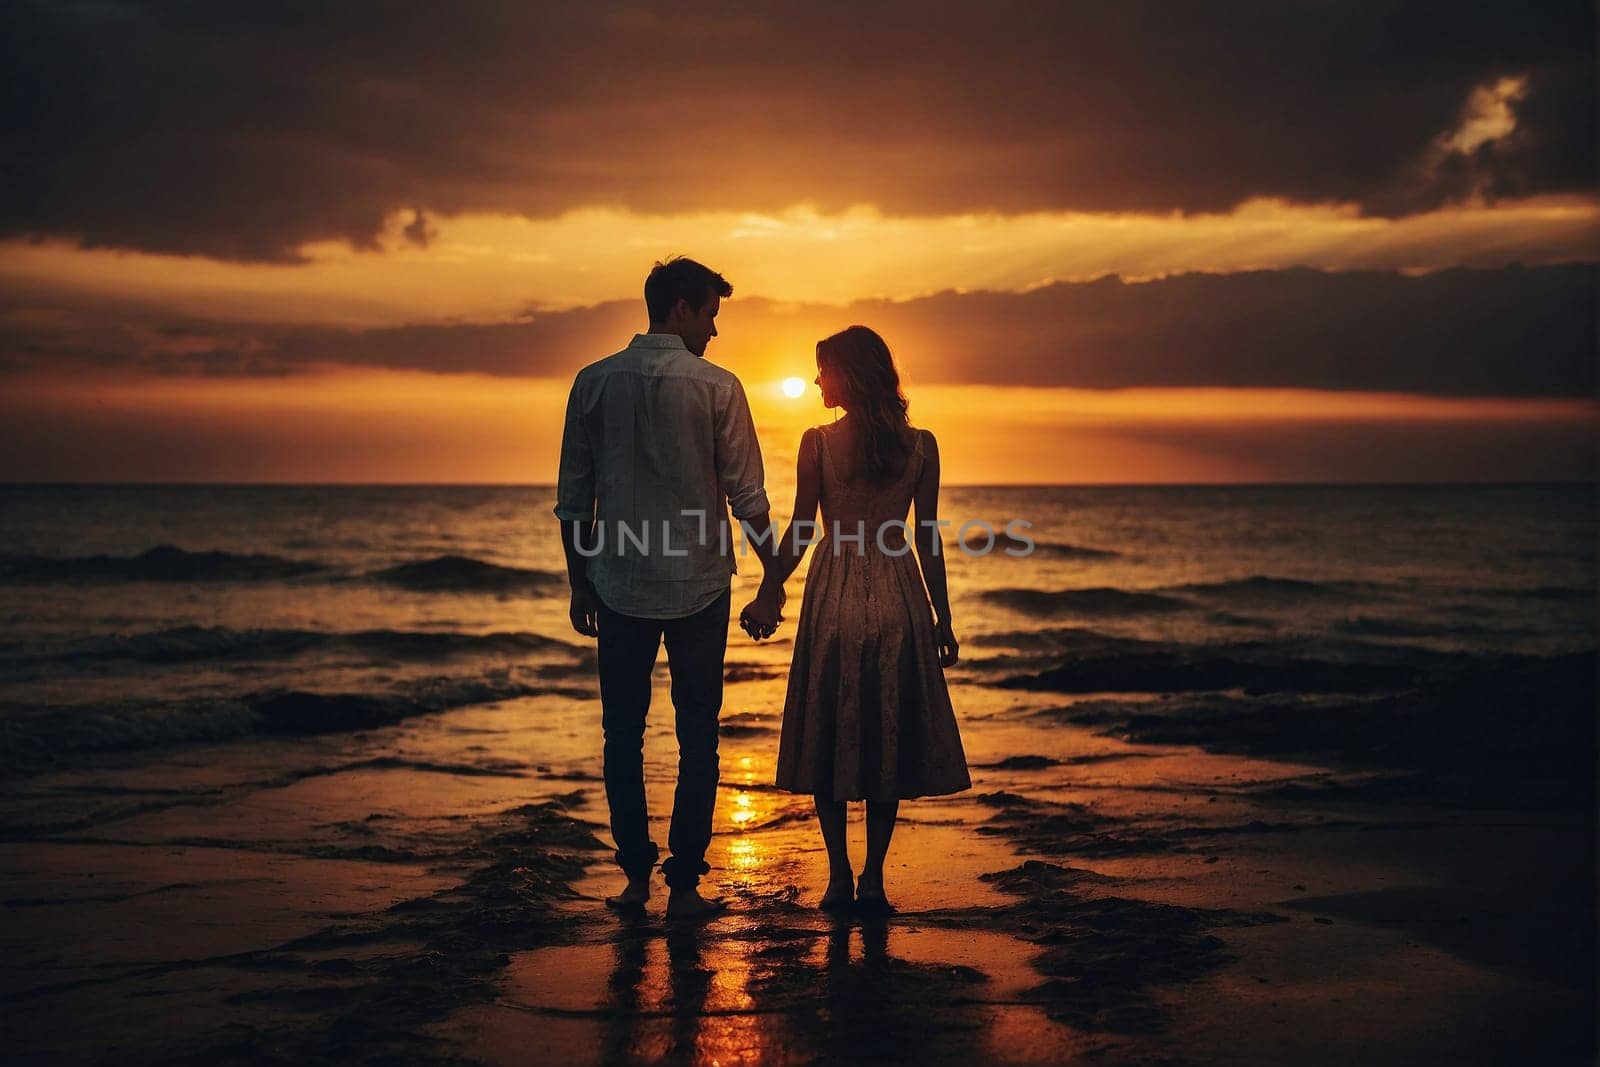 A man and a woman, standing side by side on a sandy beach, hold hands tightly and gaze into the distance.